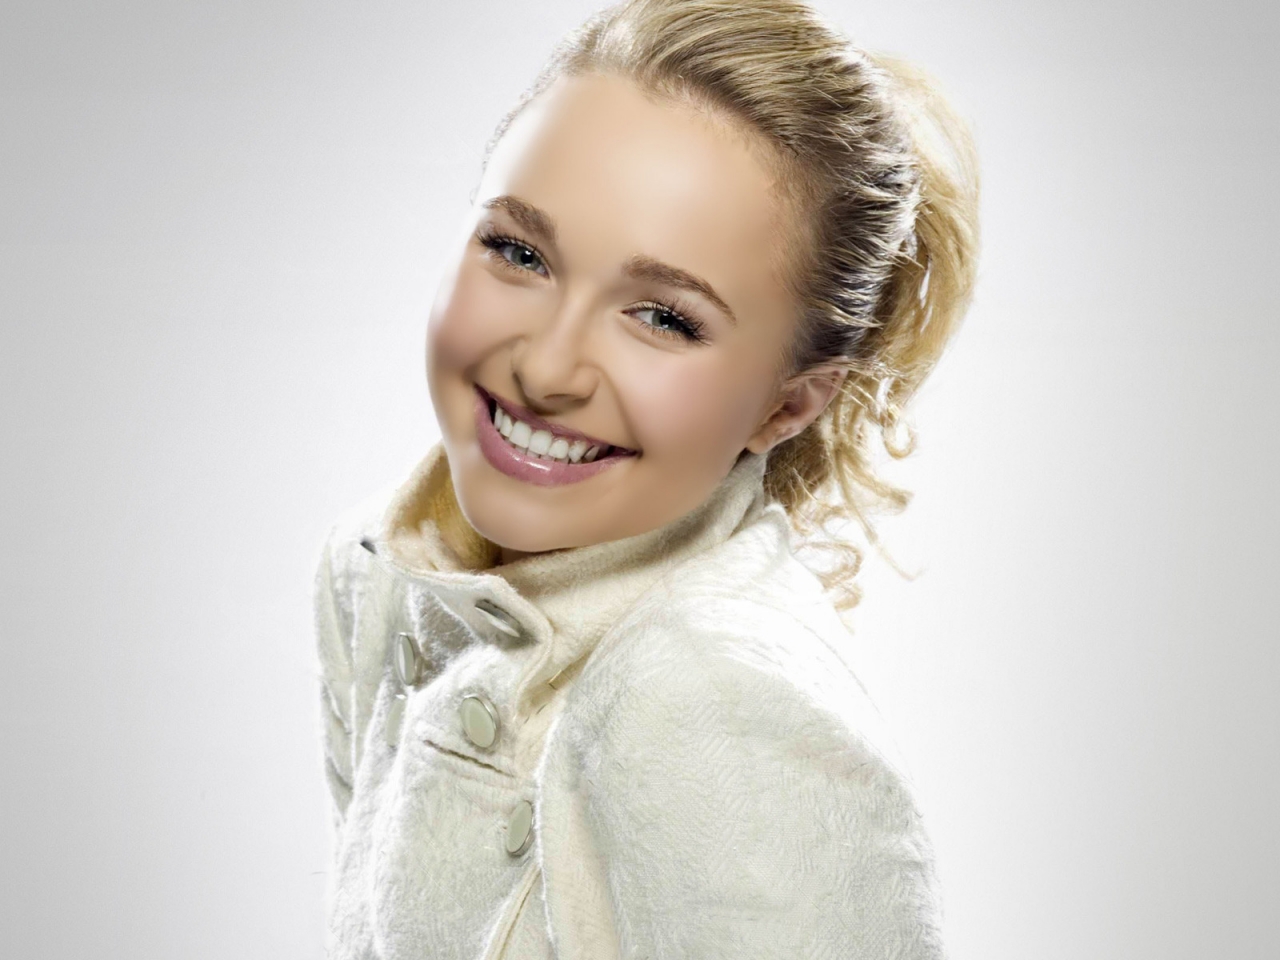 Hayden Panettiere Cute Smile for 1280 x 960 resolution